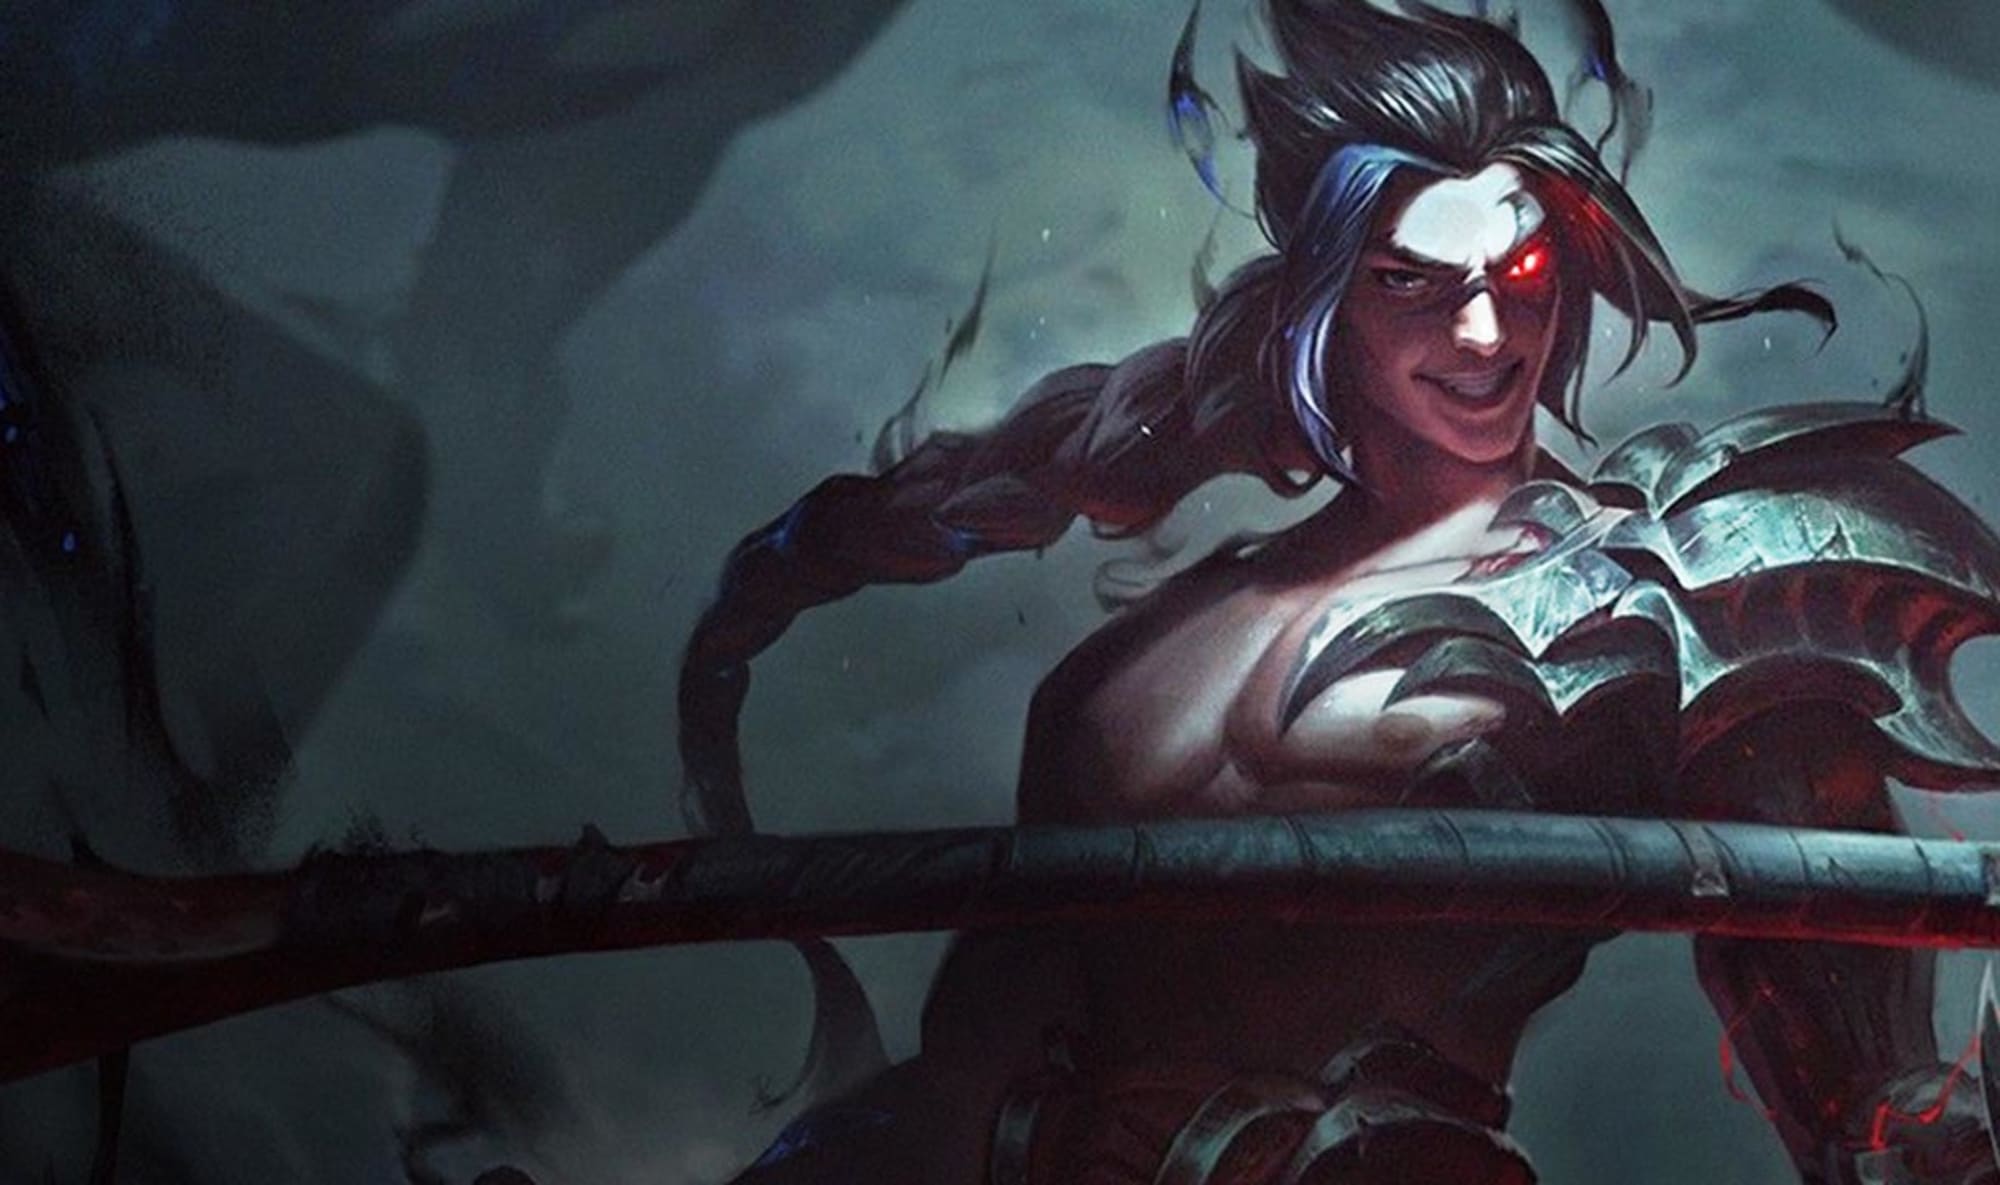 Riot Games to Roll Out League of Legends: Wild Rift to Mobile by 2020